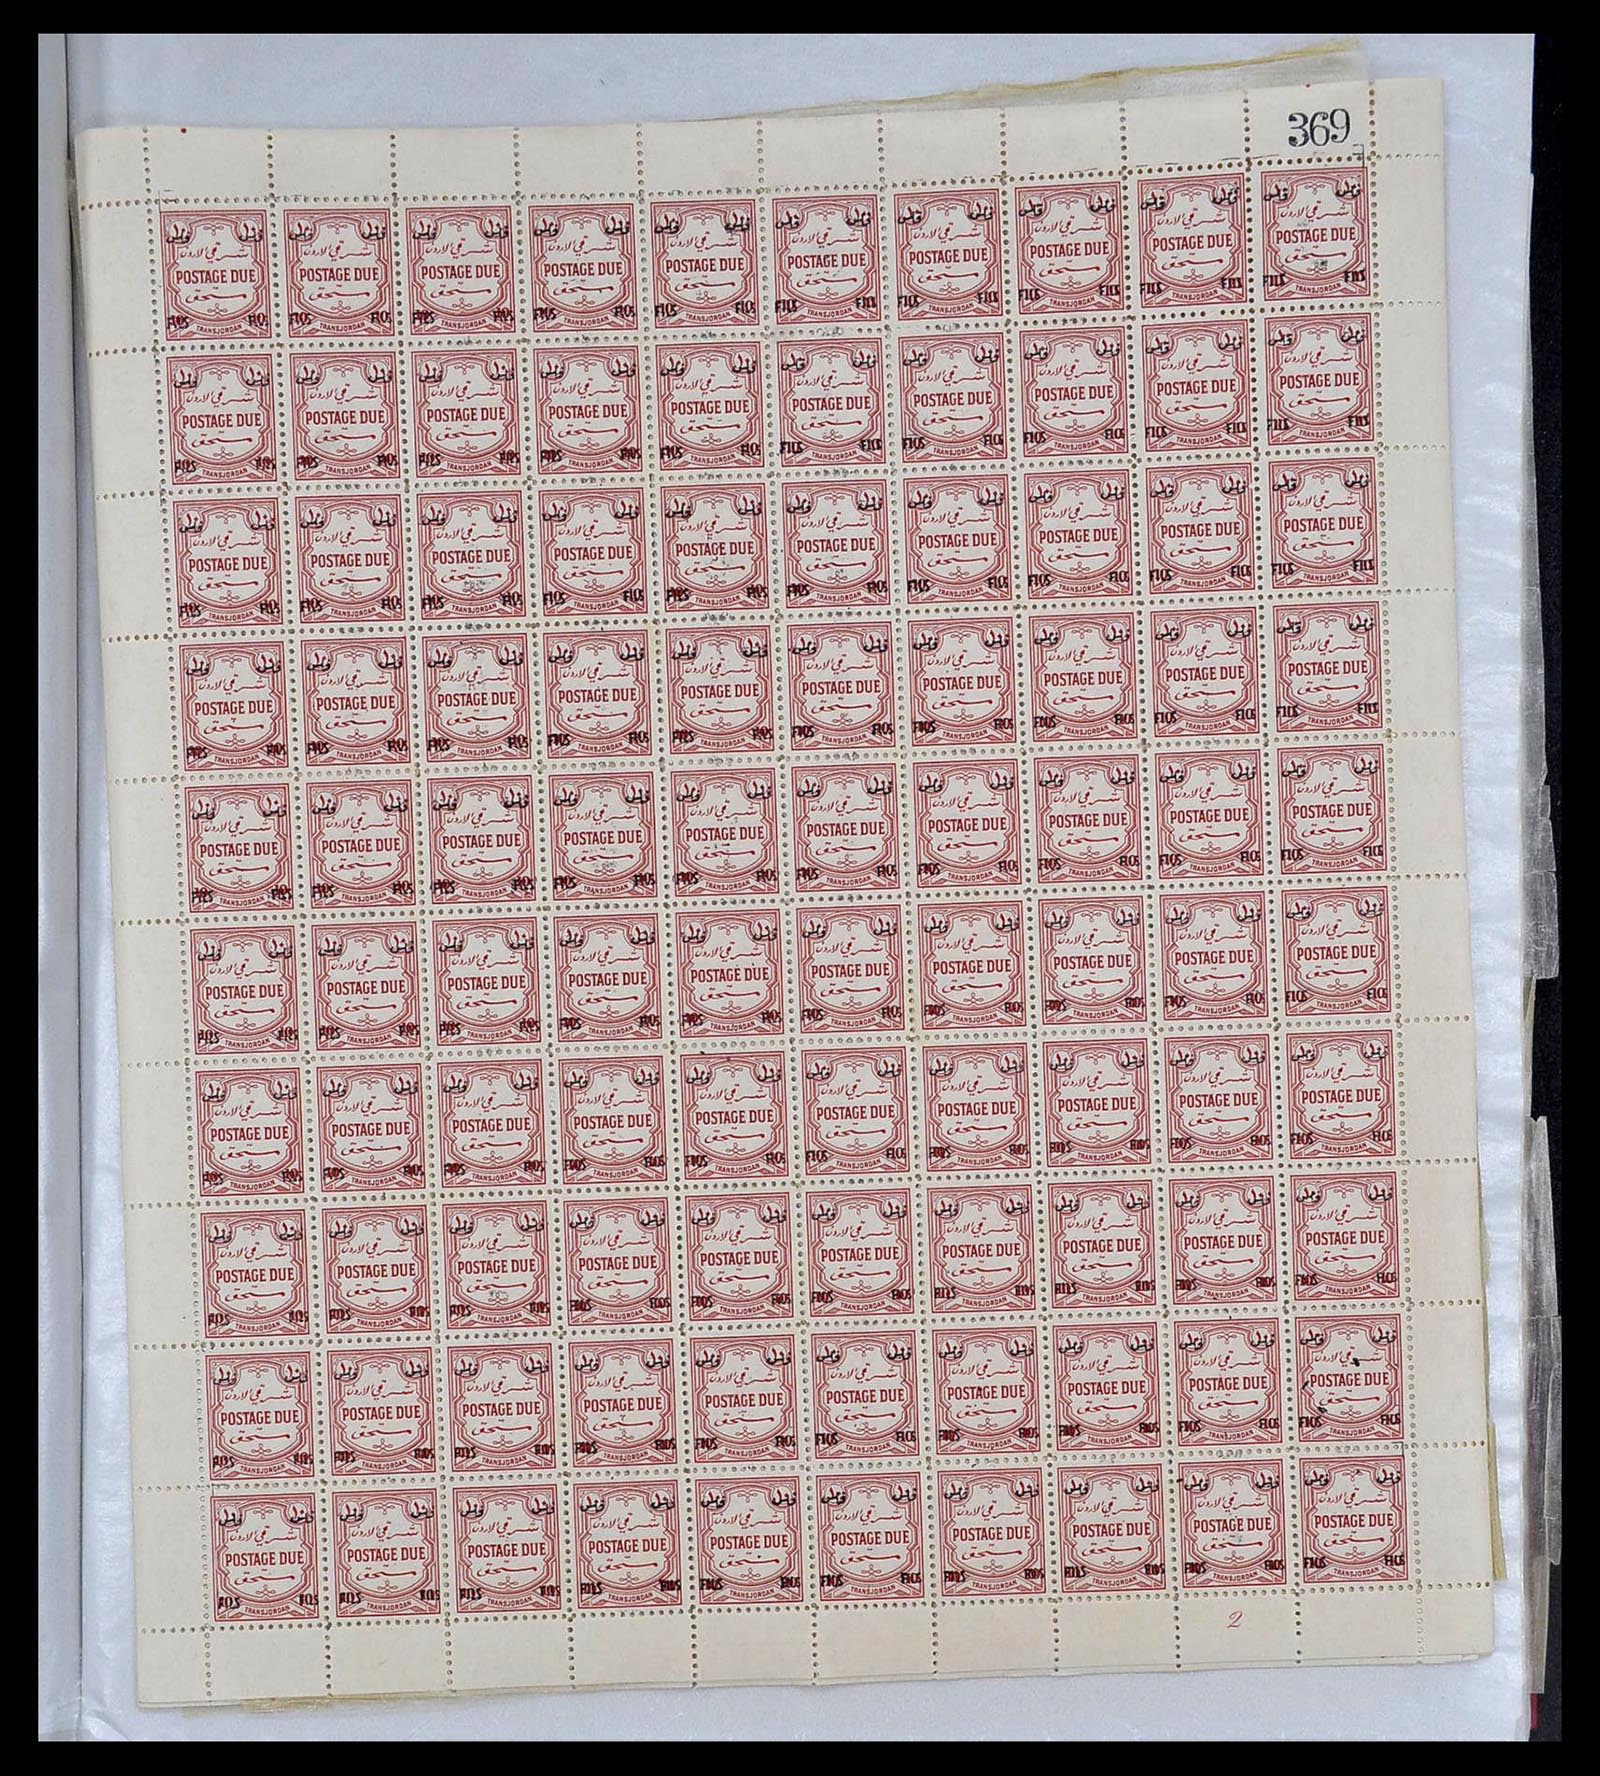 34126 004 - Stamp collection 34126 Jordan postage dues 1952-1957.